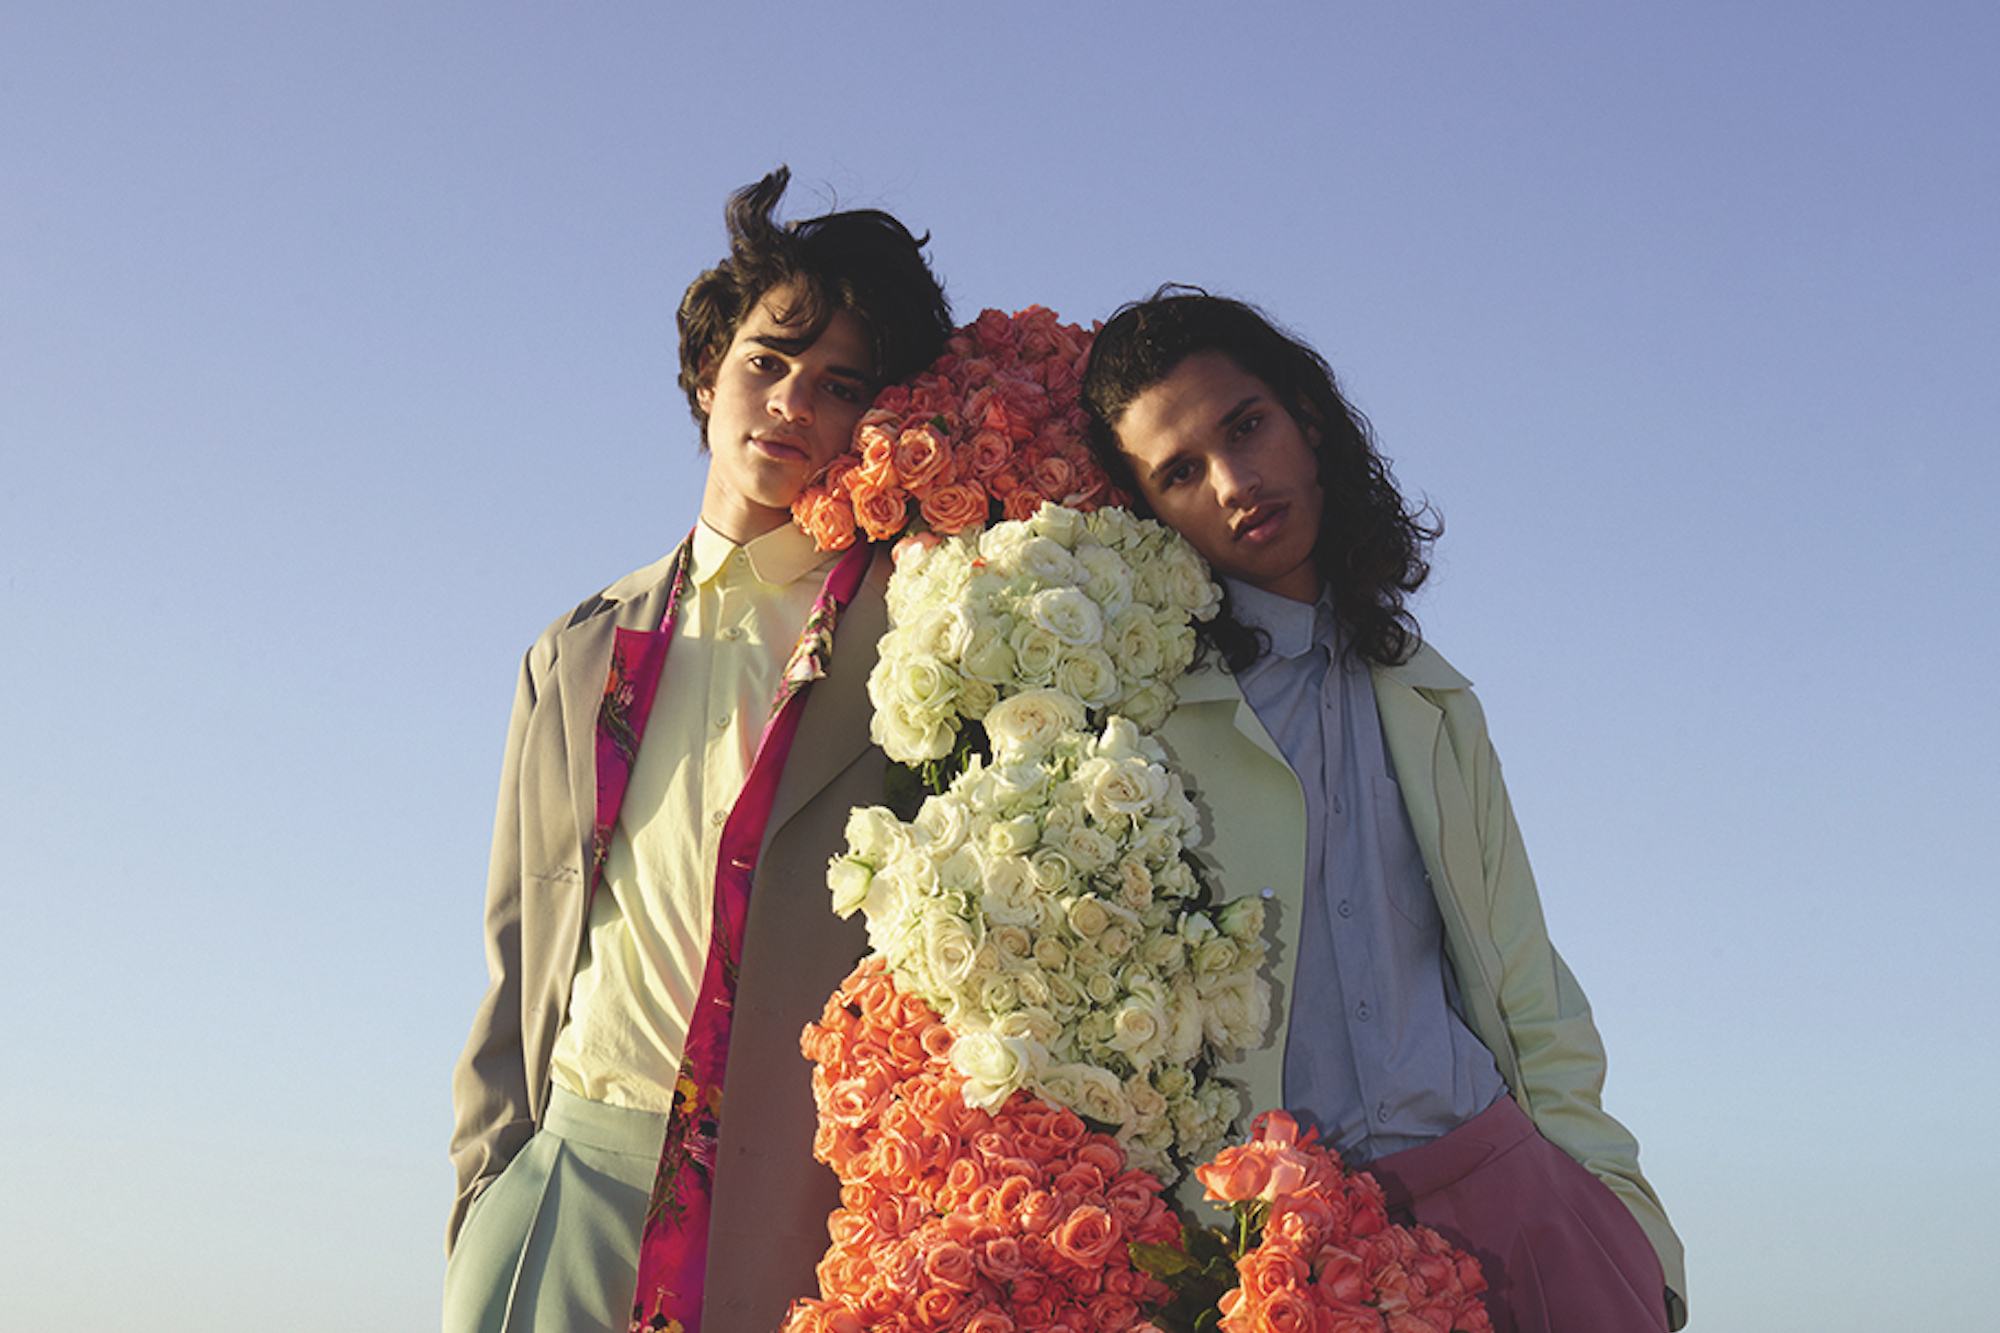 Louis Vuitton unveil flower-filled imagery for SS20 Men's titled